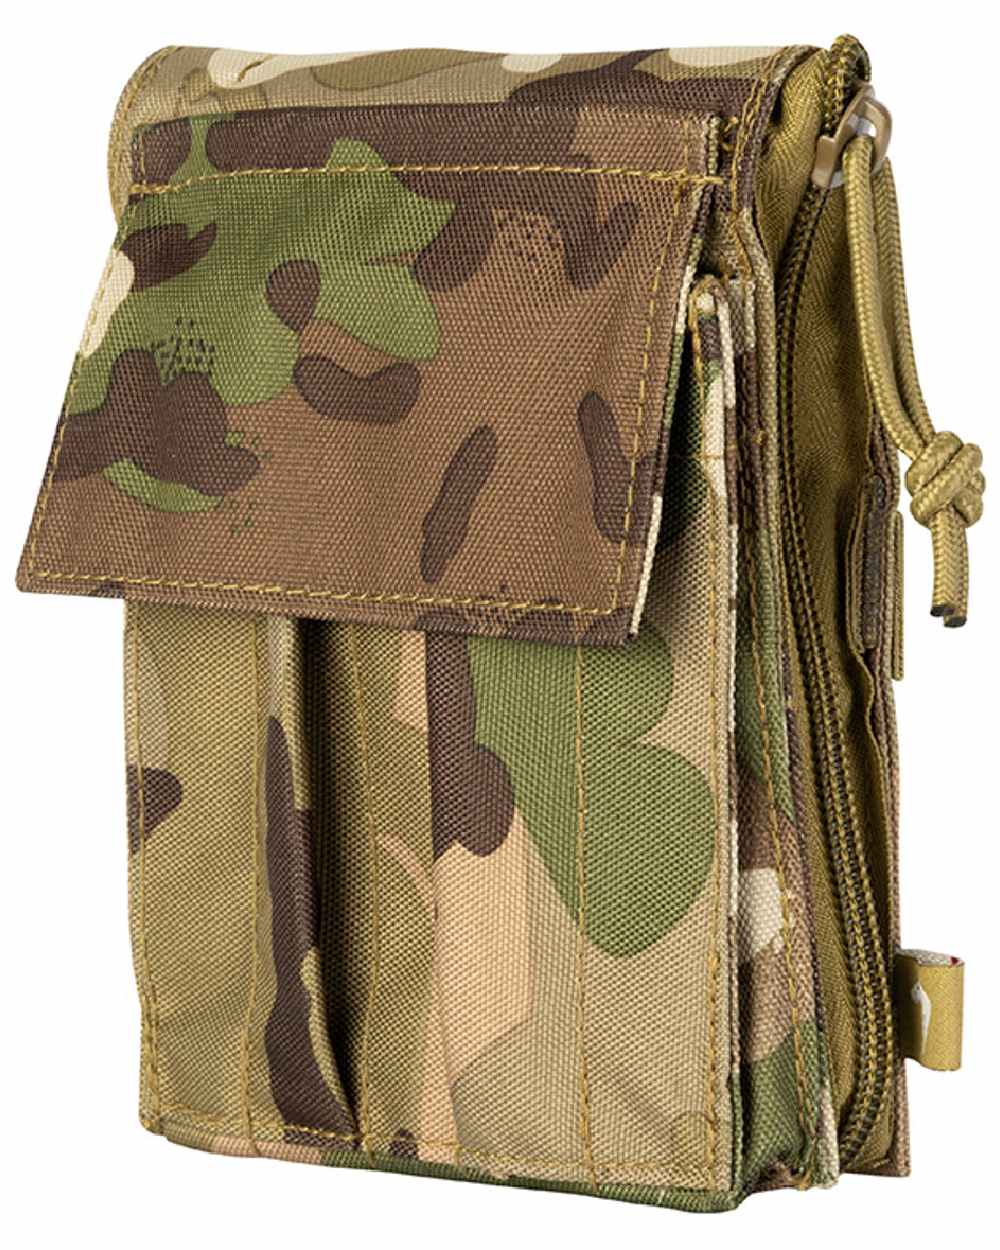 Viper Notebook Holder Camo in Camouflage Green 